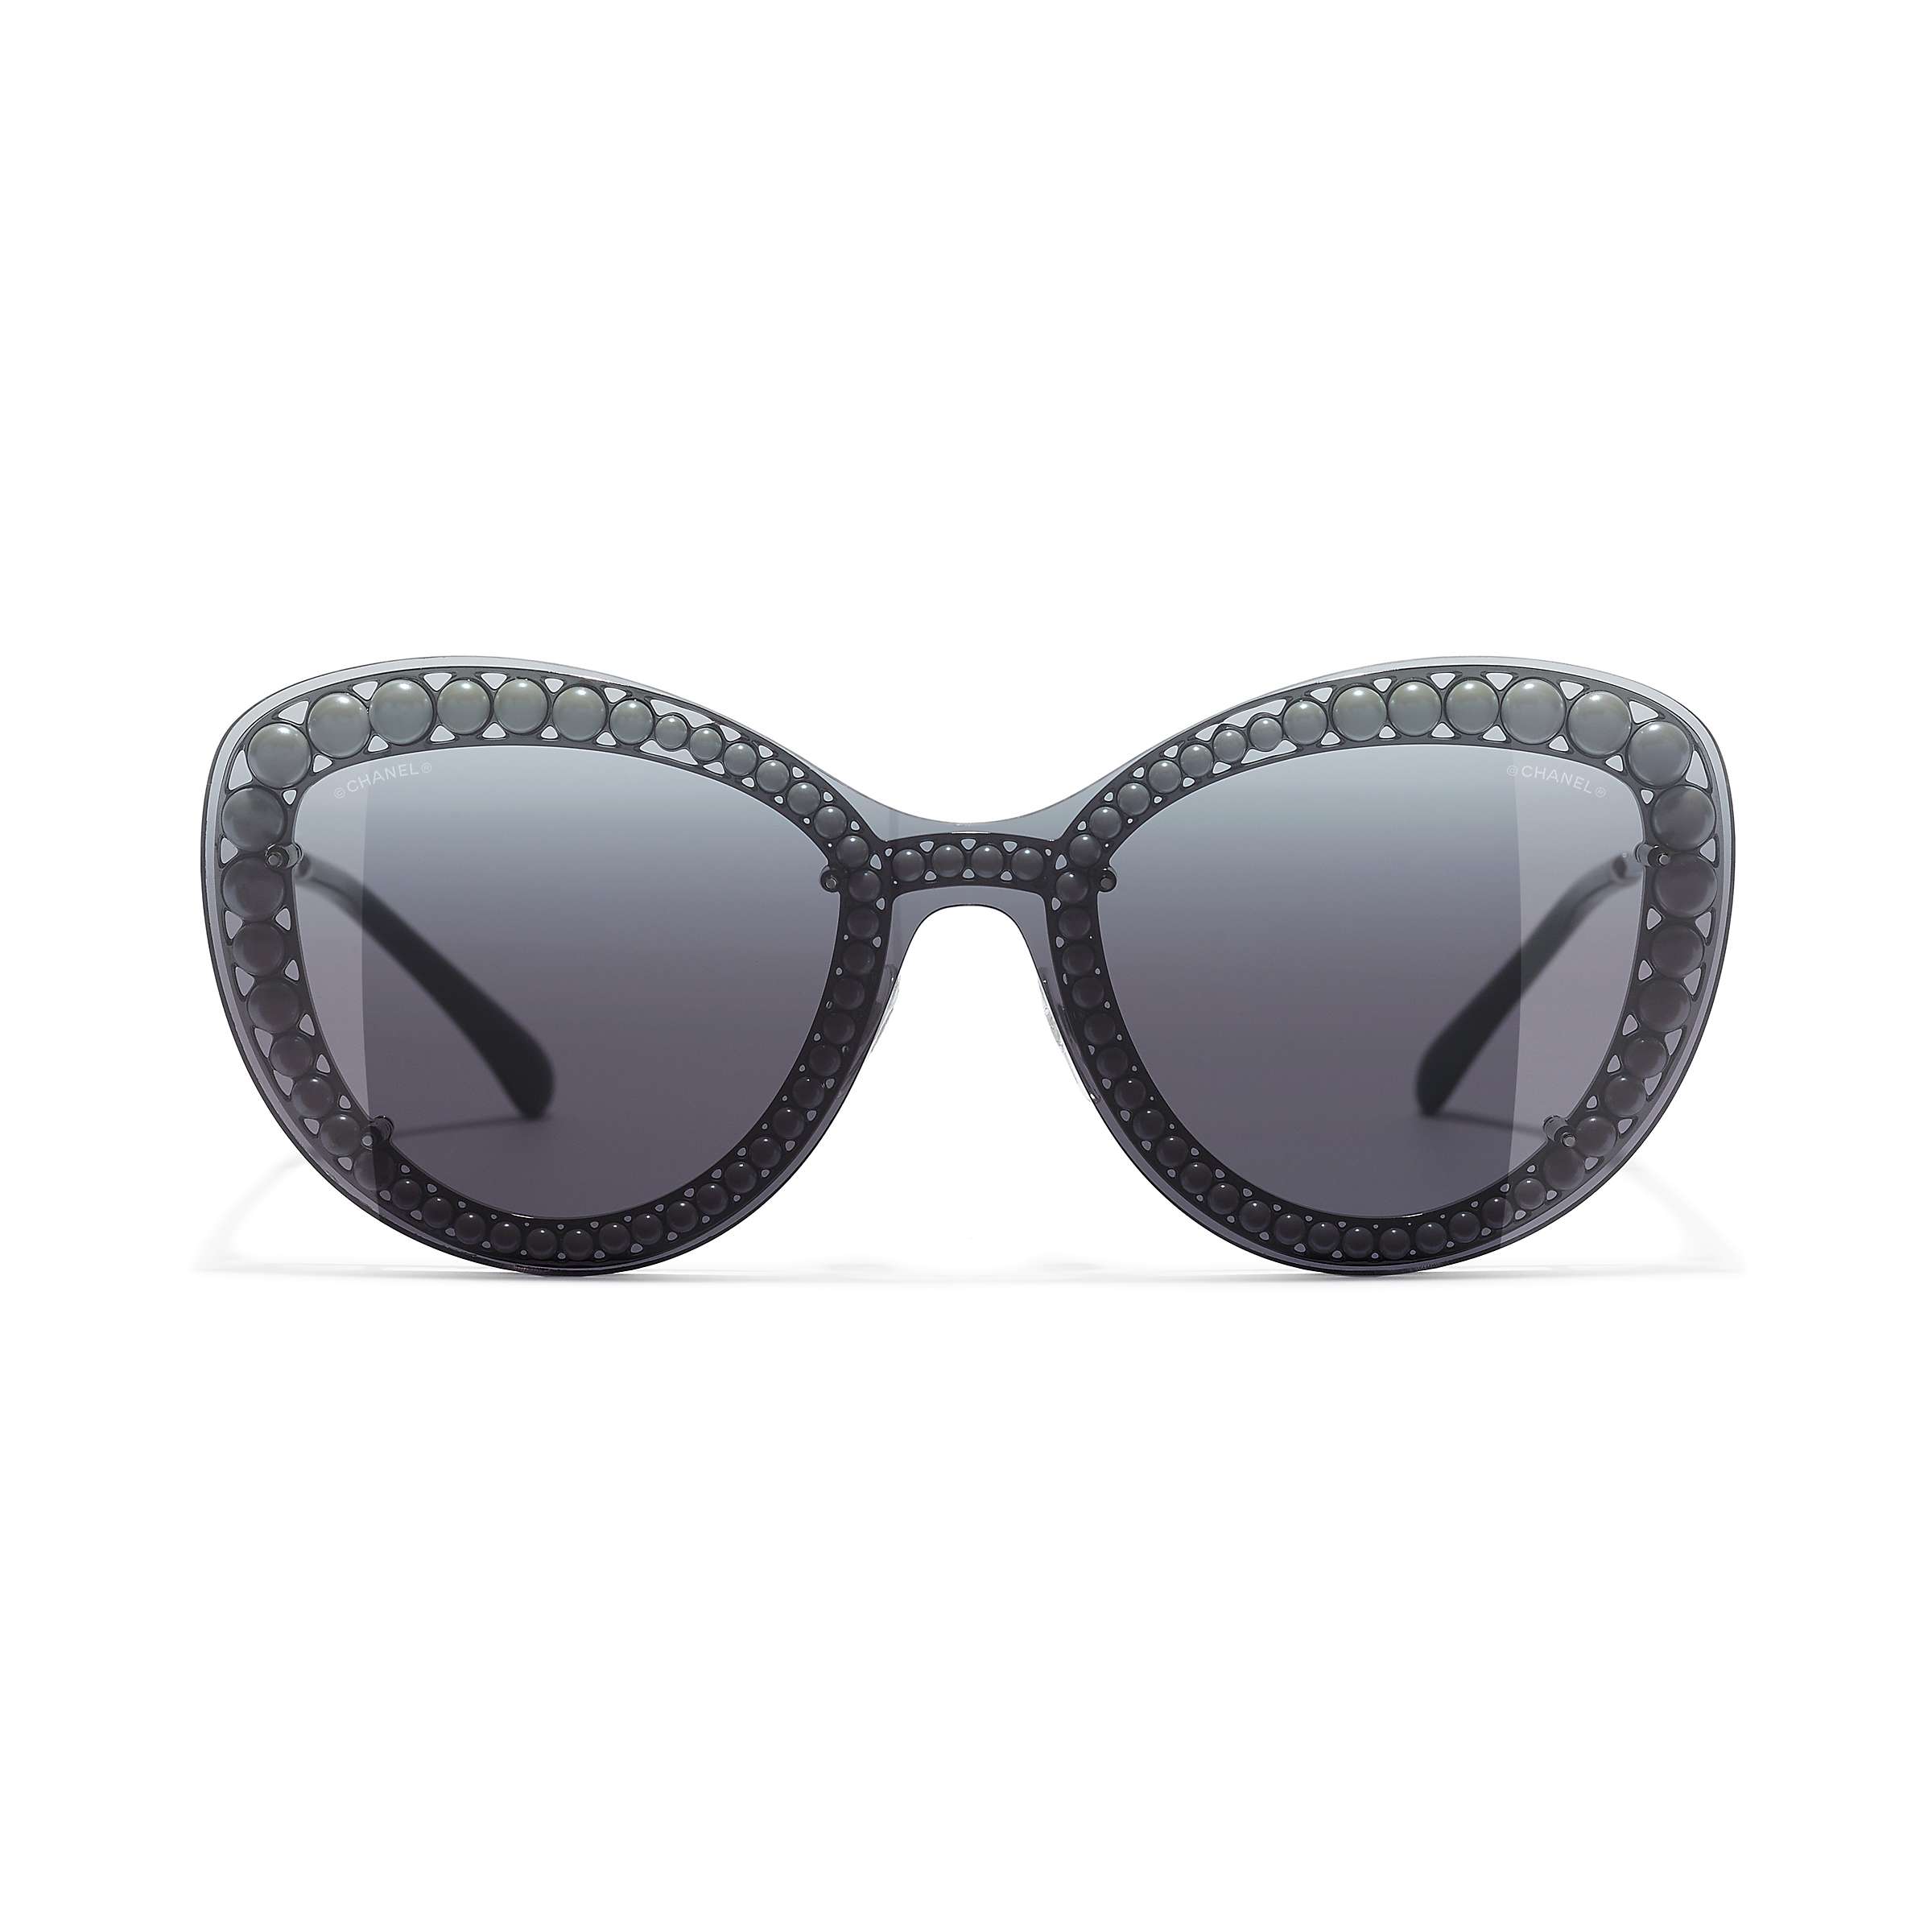 CHANEL Butterfly Sunglasses CH4236 Gunmetal/Grey Gradient at John Lewis ...